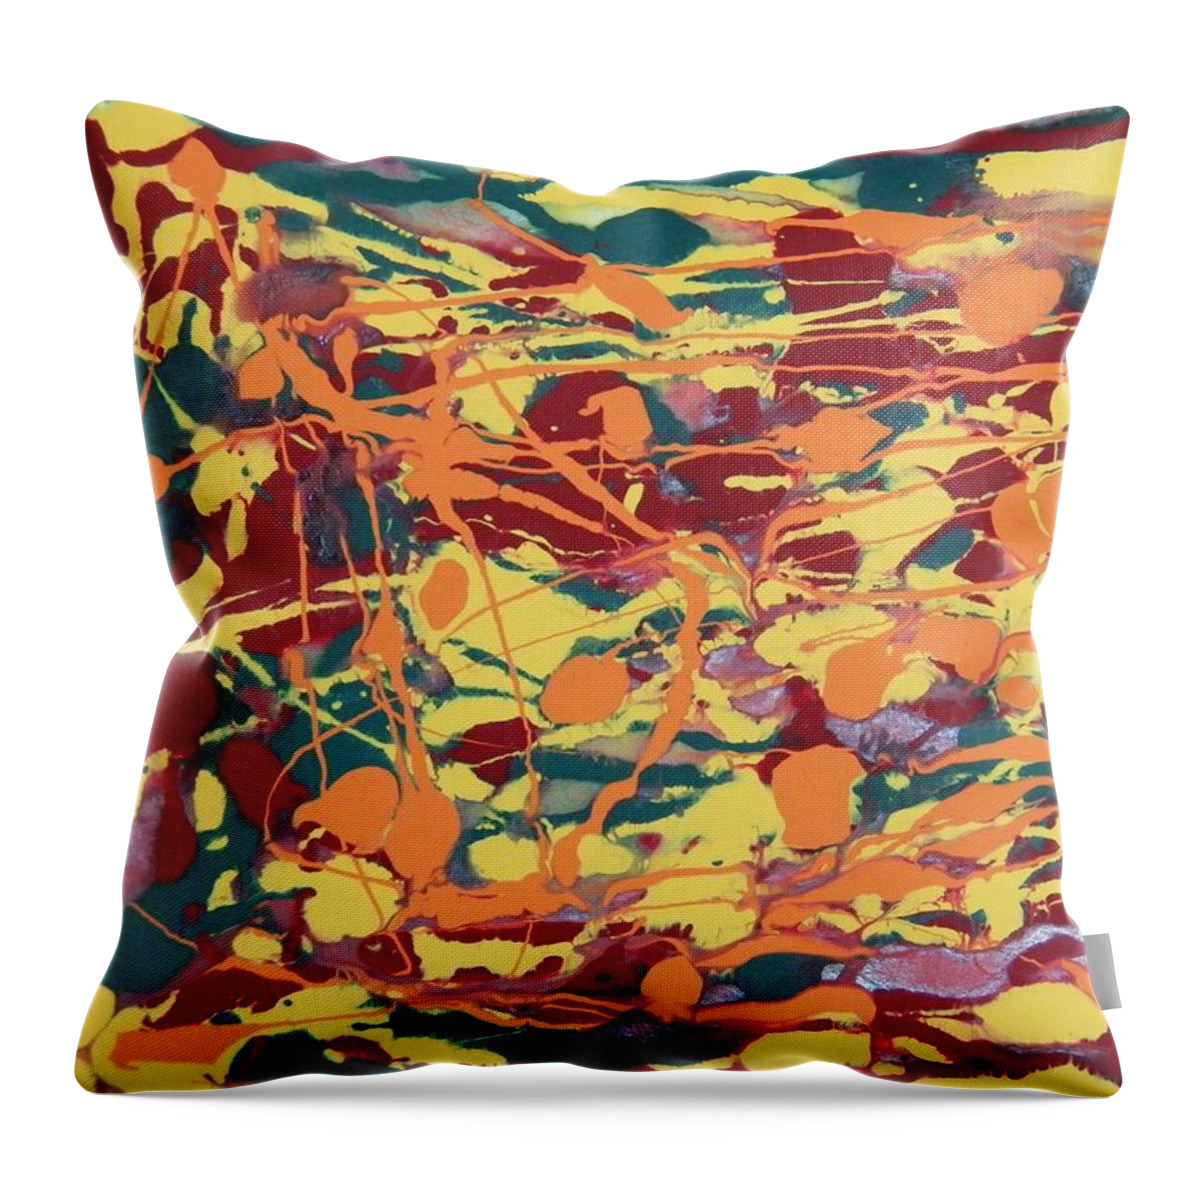 Abstract Throw Pillow featuring the painting Forest Dance by Corinne Elizabeth Cowherd